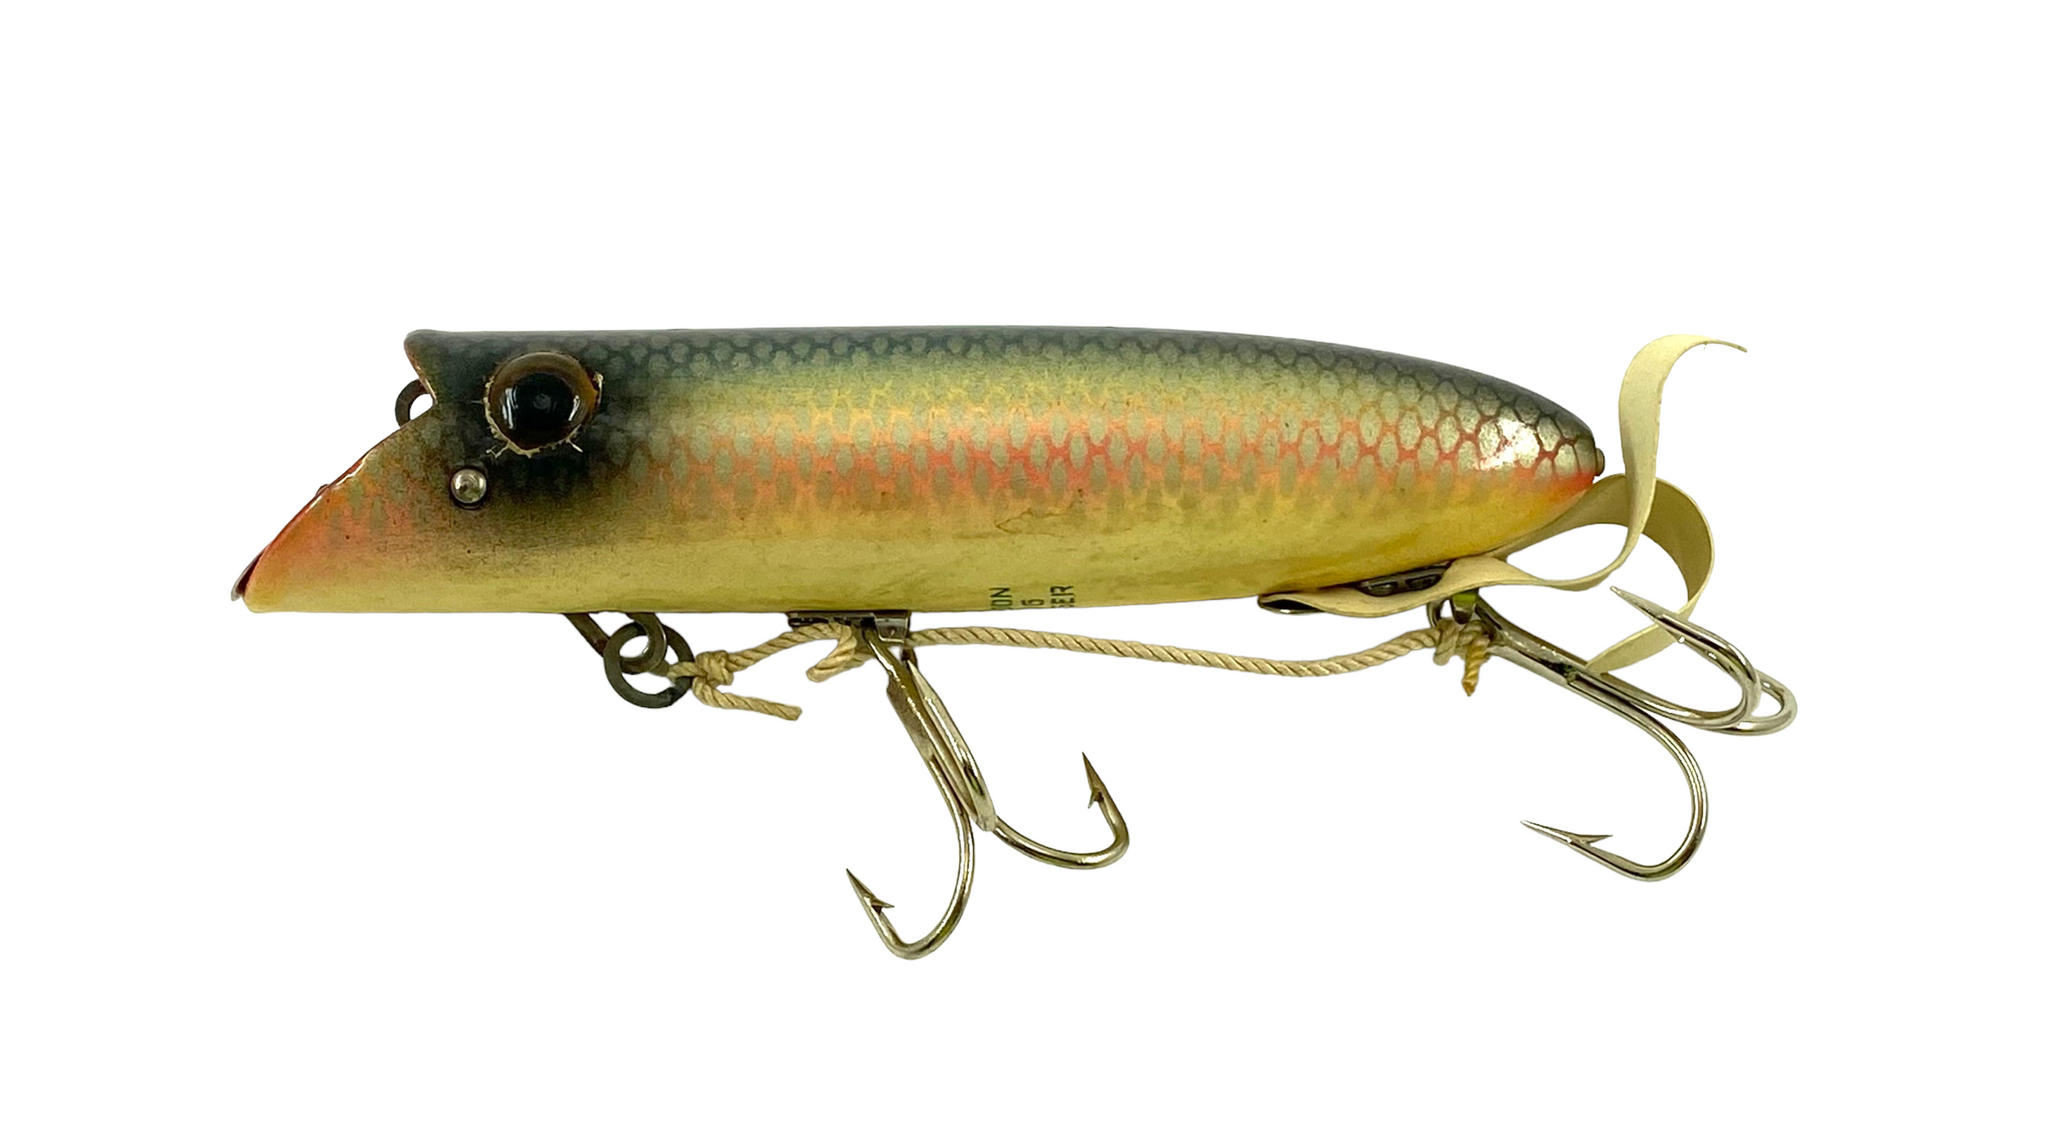 https://toadtackle.net/cdn/shop/products/image_9577243a-2013-4327-9403-696243972448_1024x1024@2x.png?v=1673922700